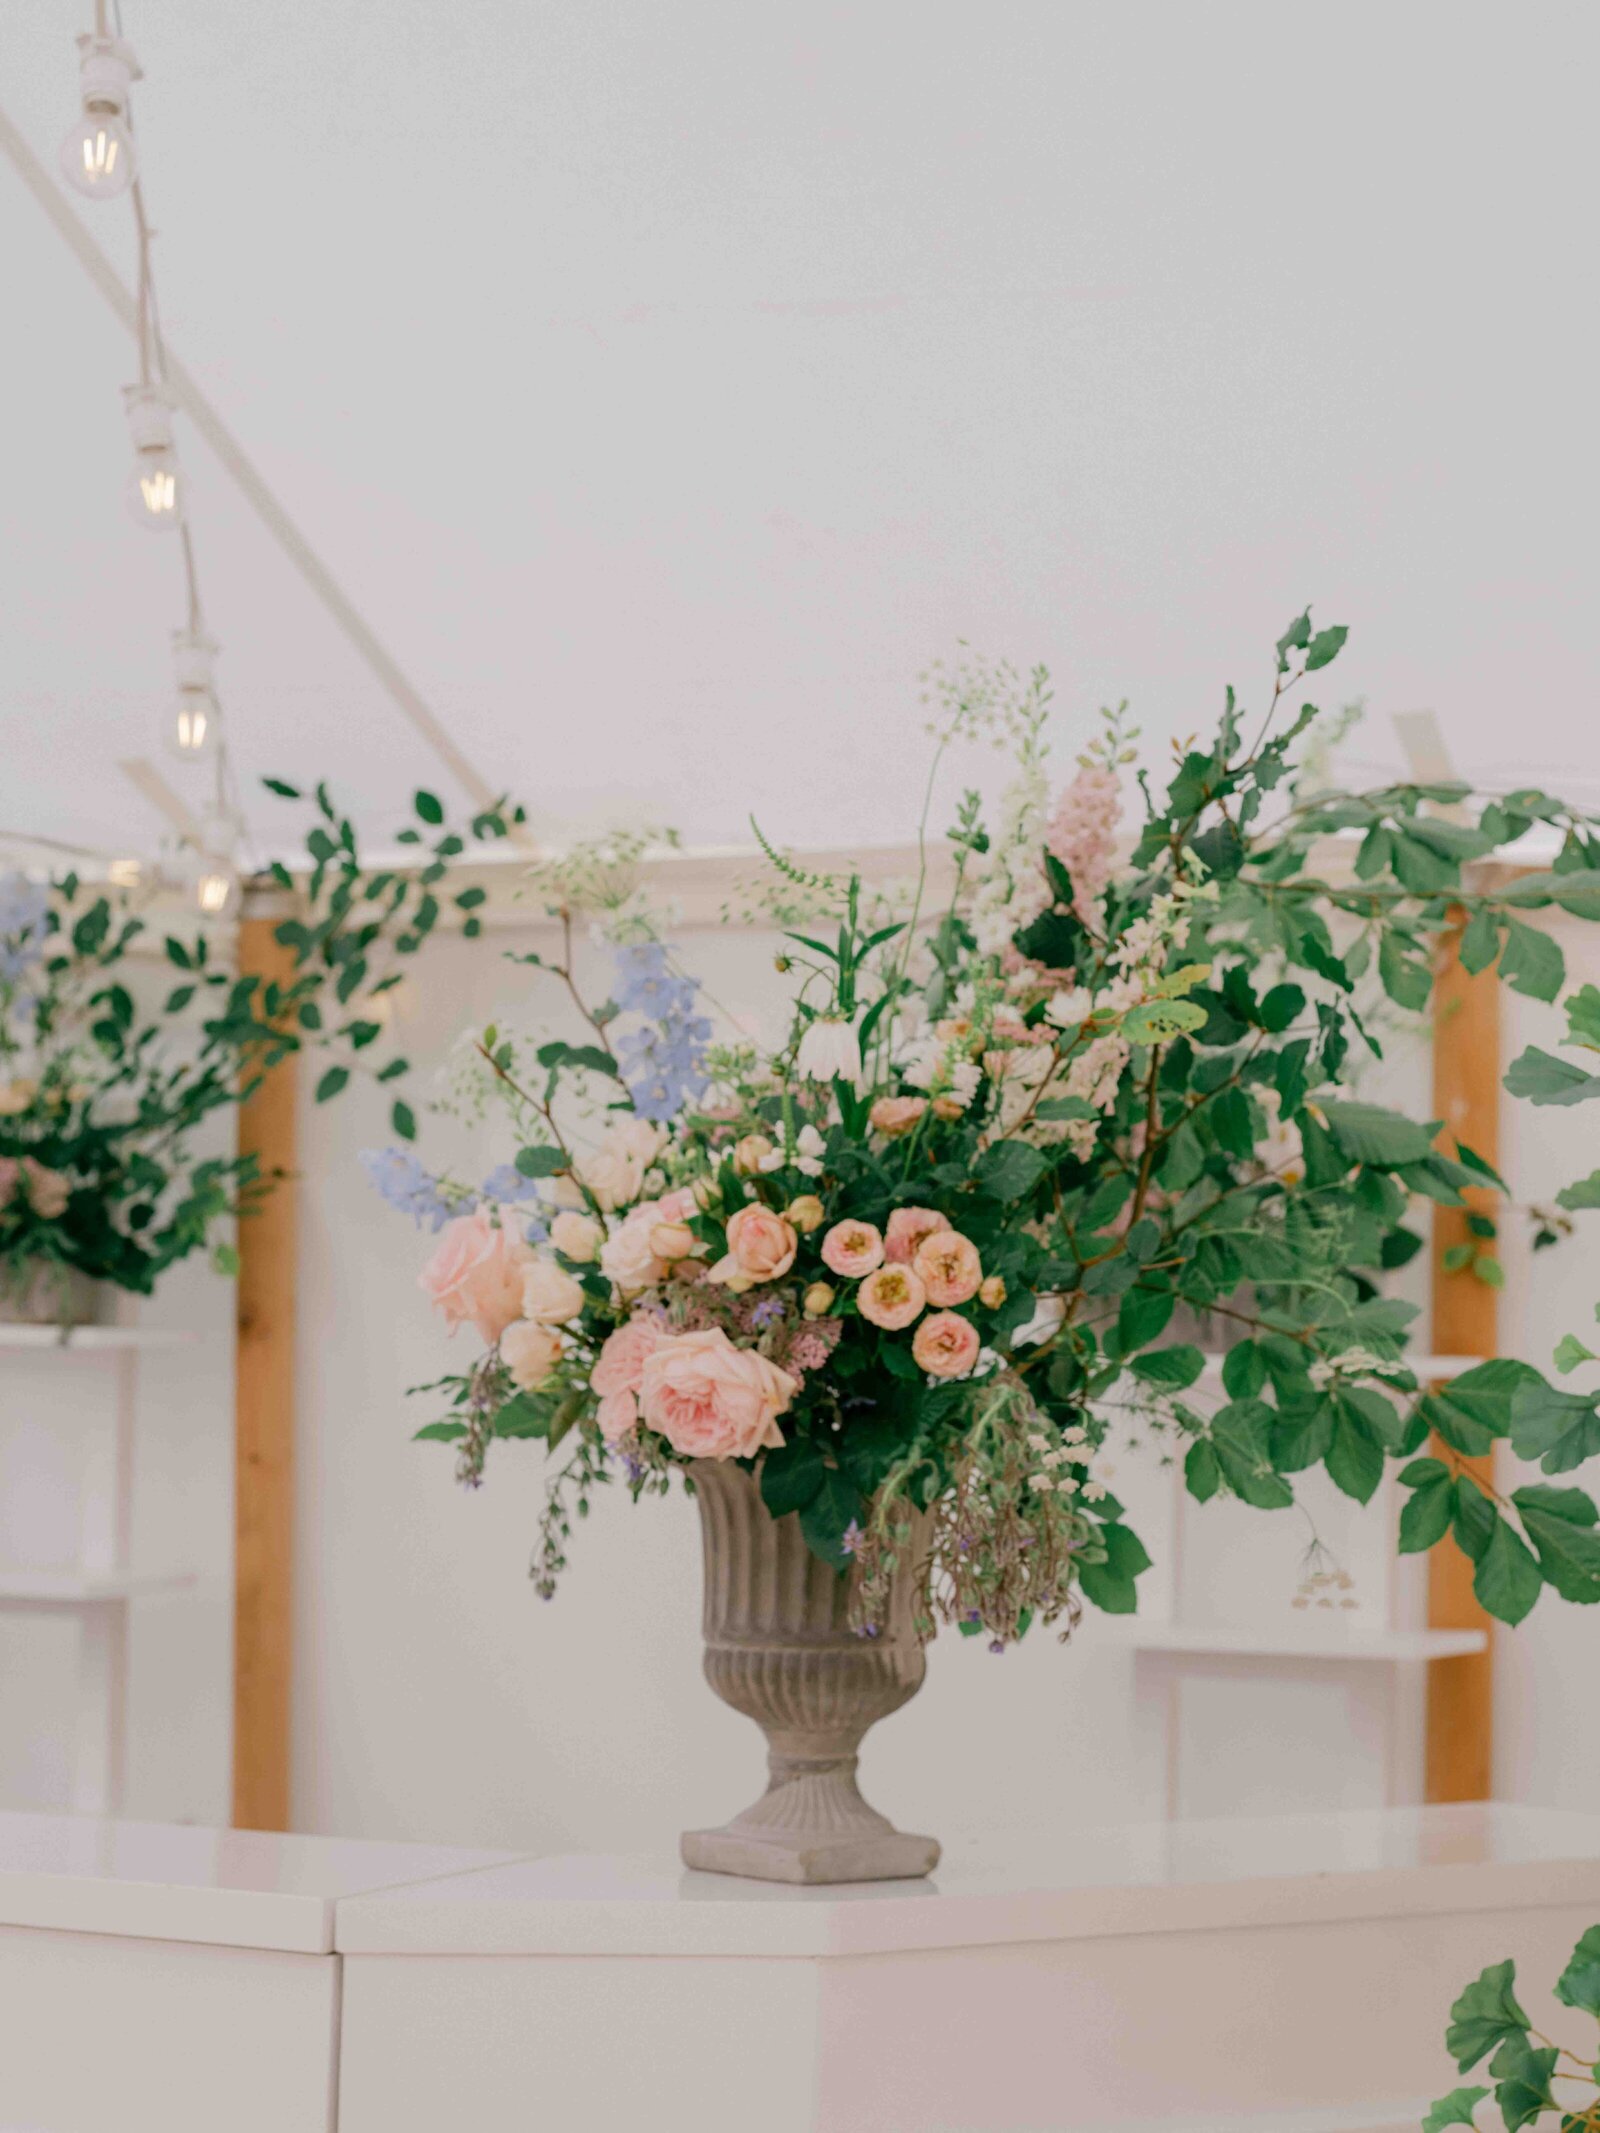 Floral Accents at Wedding Reception